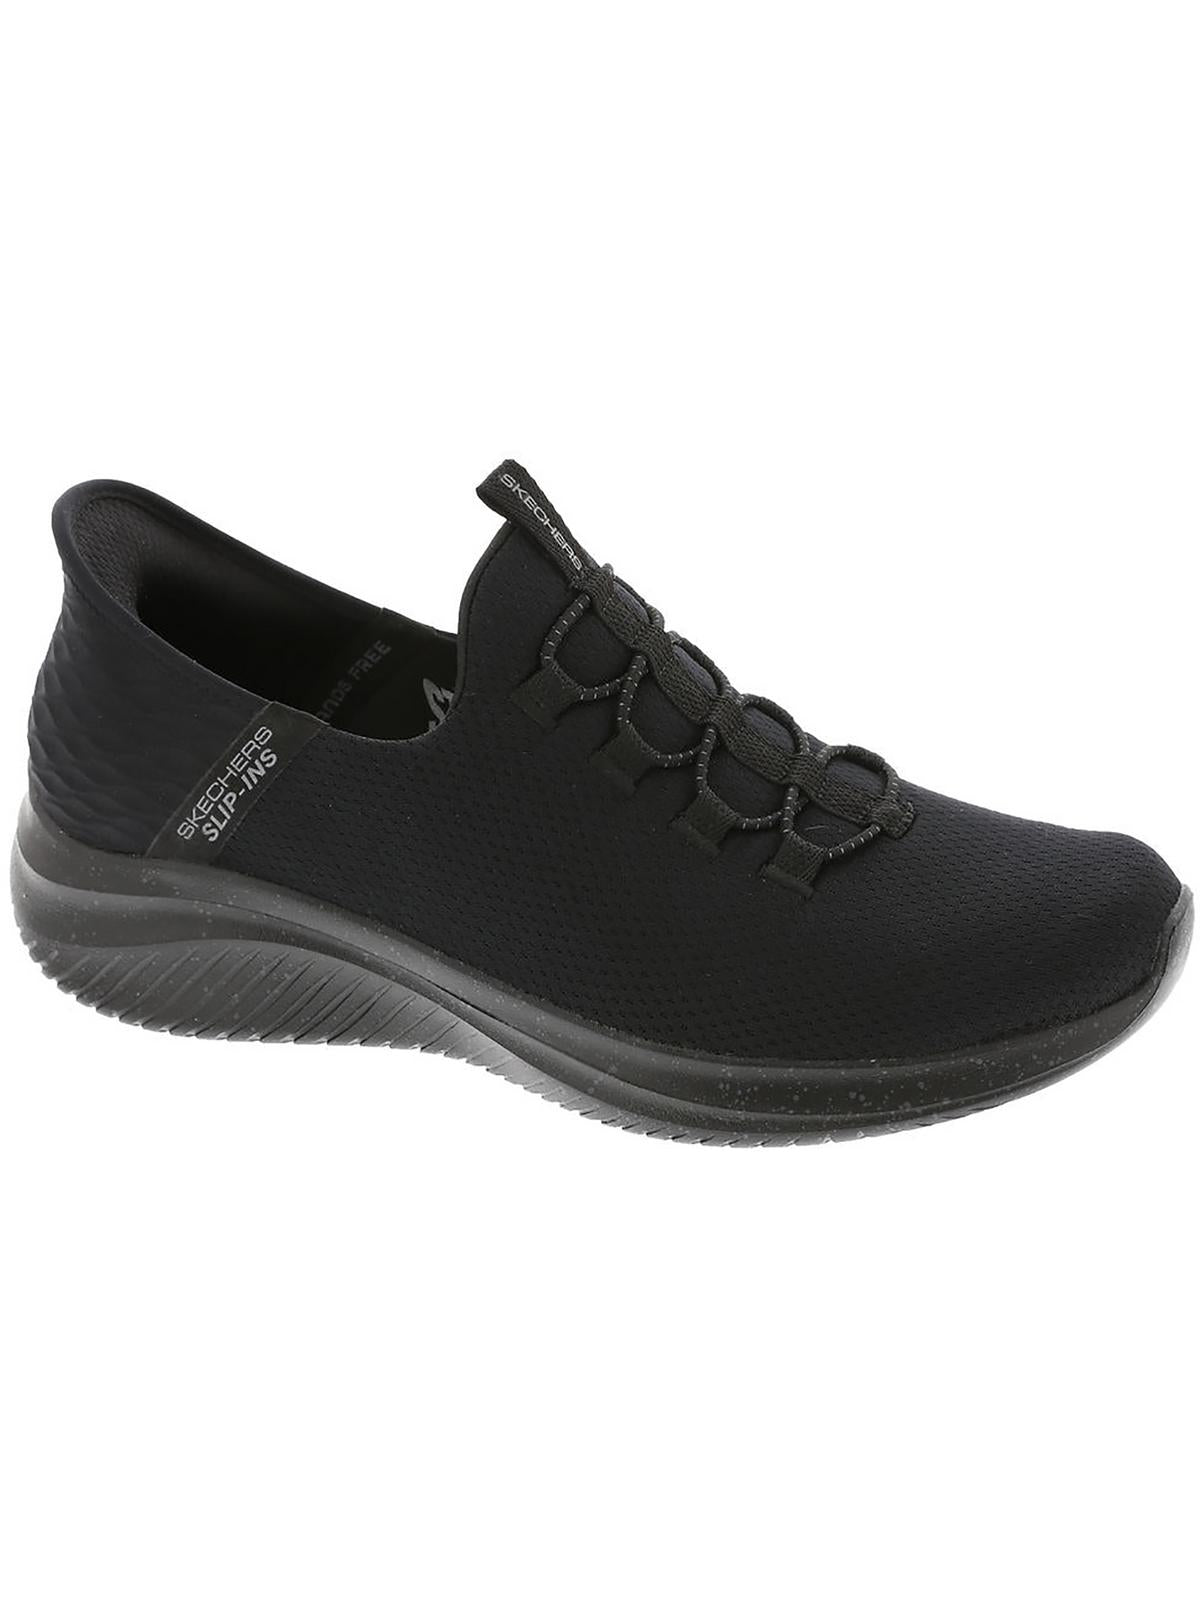 Skechers Mens Comfort Slip On Casual And Fashion Sneakers In Black